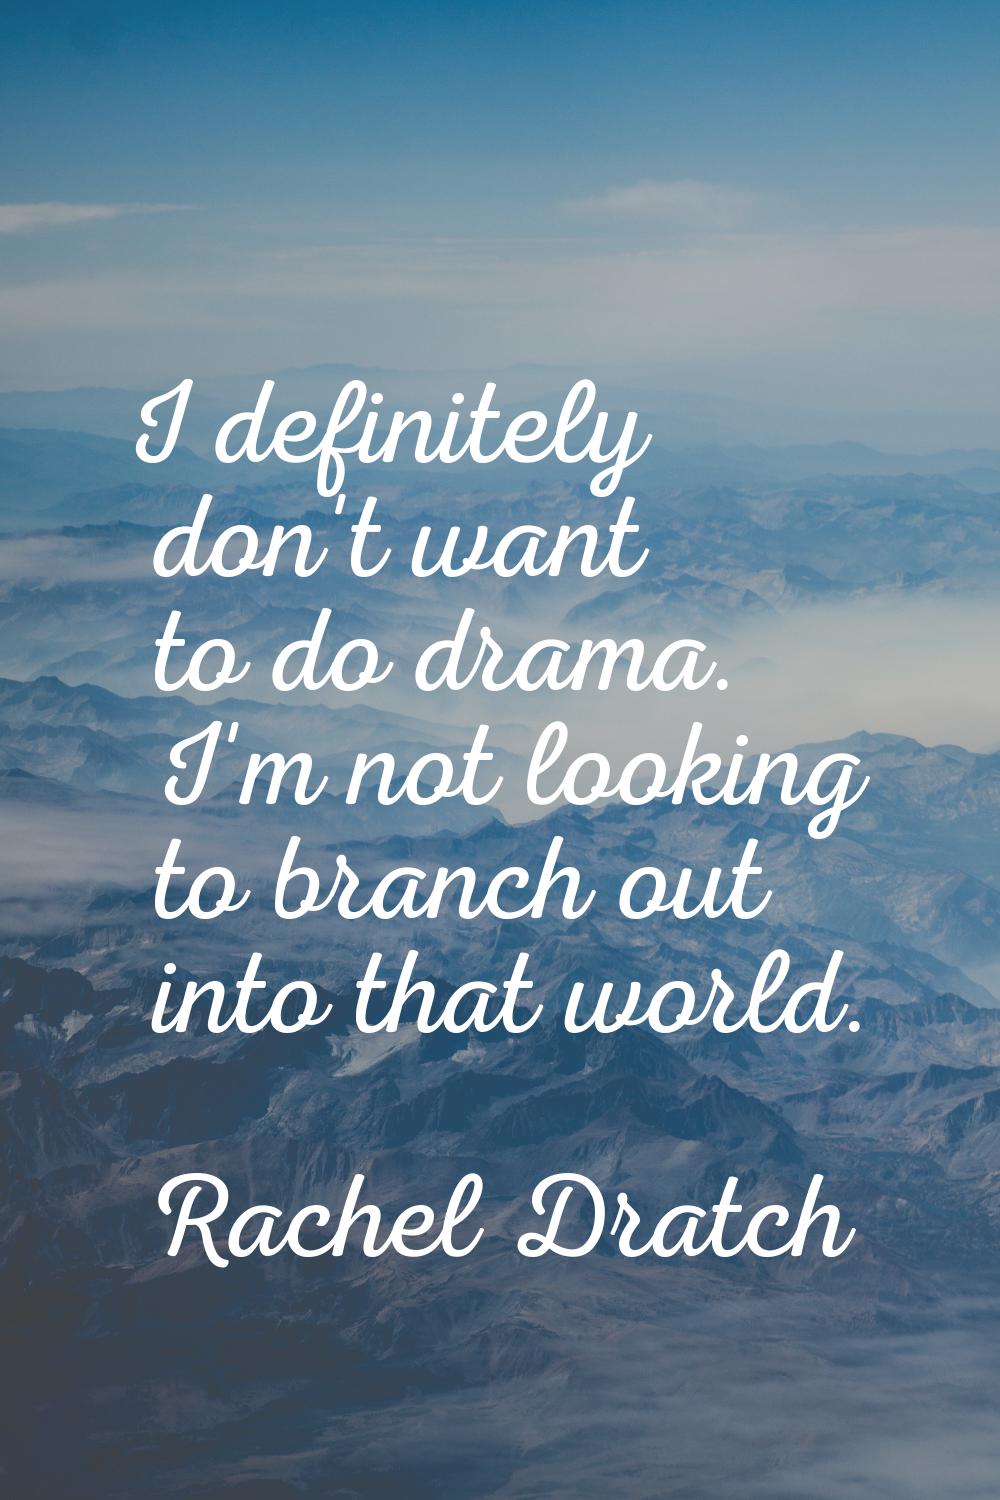 I definitely don't want to do drama. I'm not looking to branch out into that world.